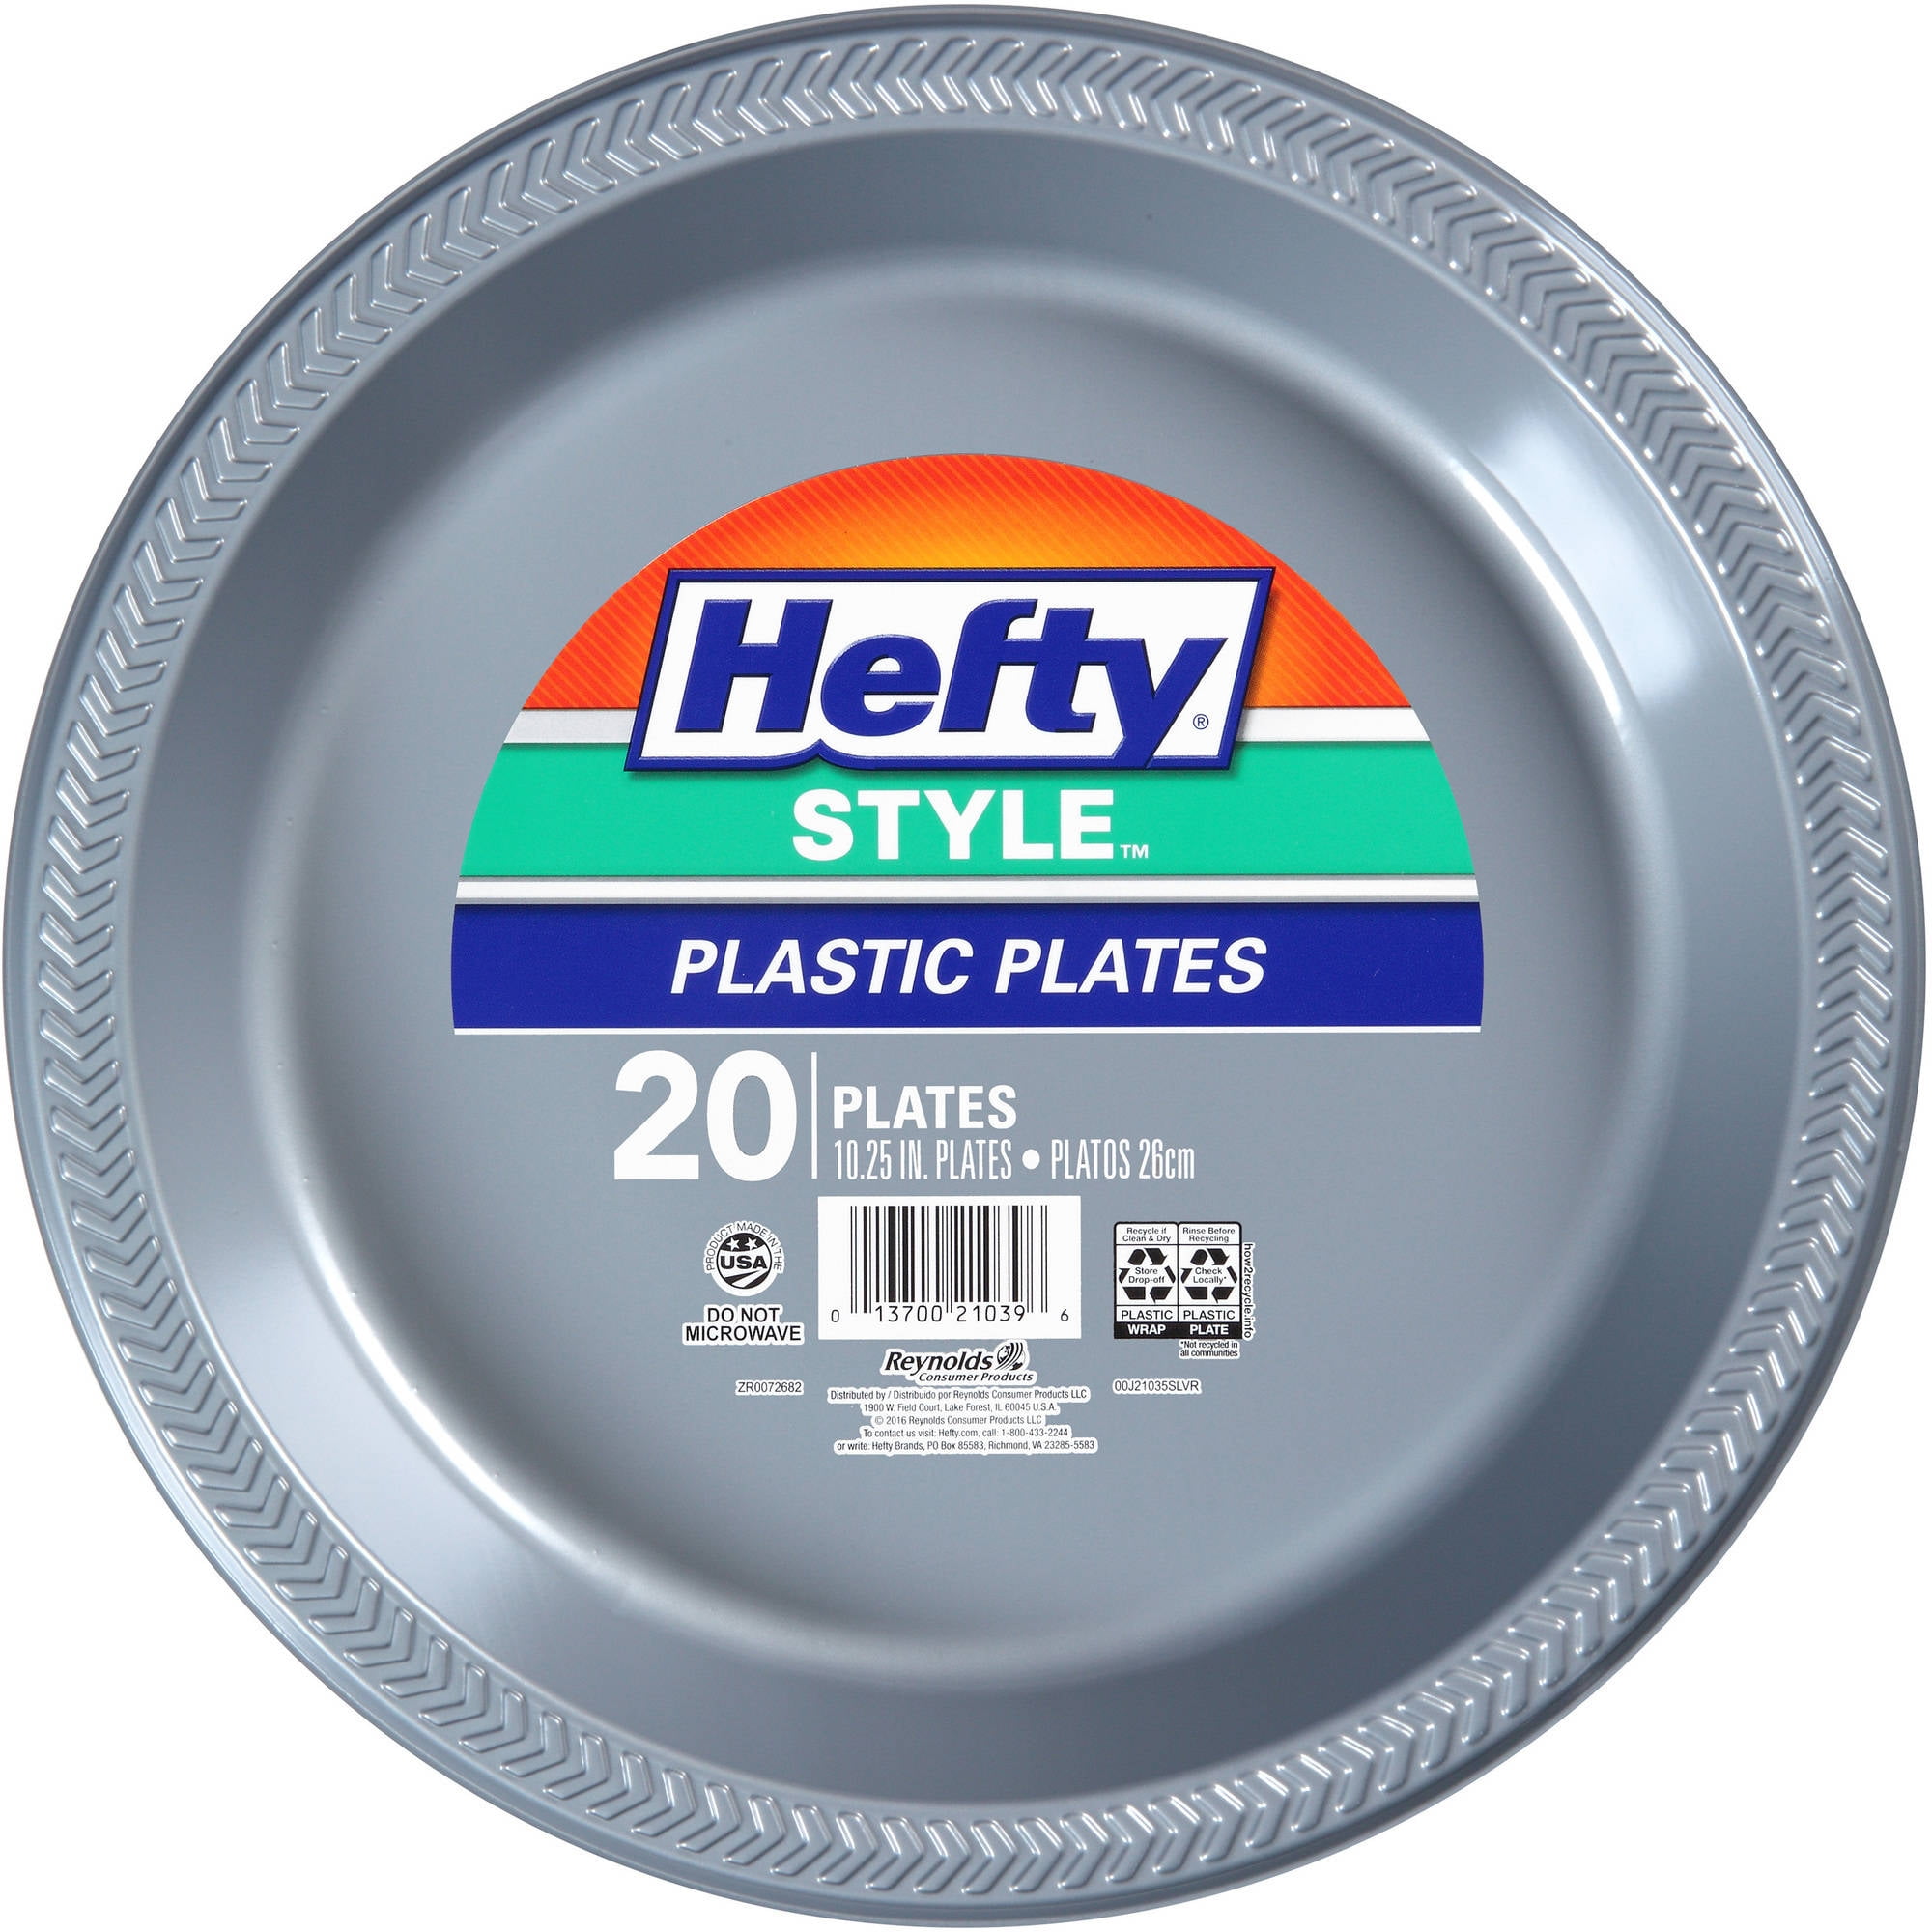 Hefty Style Large Square Foam Party Plates, 20 Count - Walmart.com